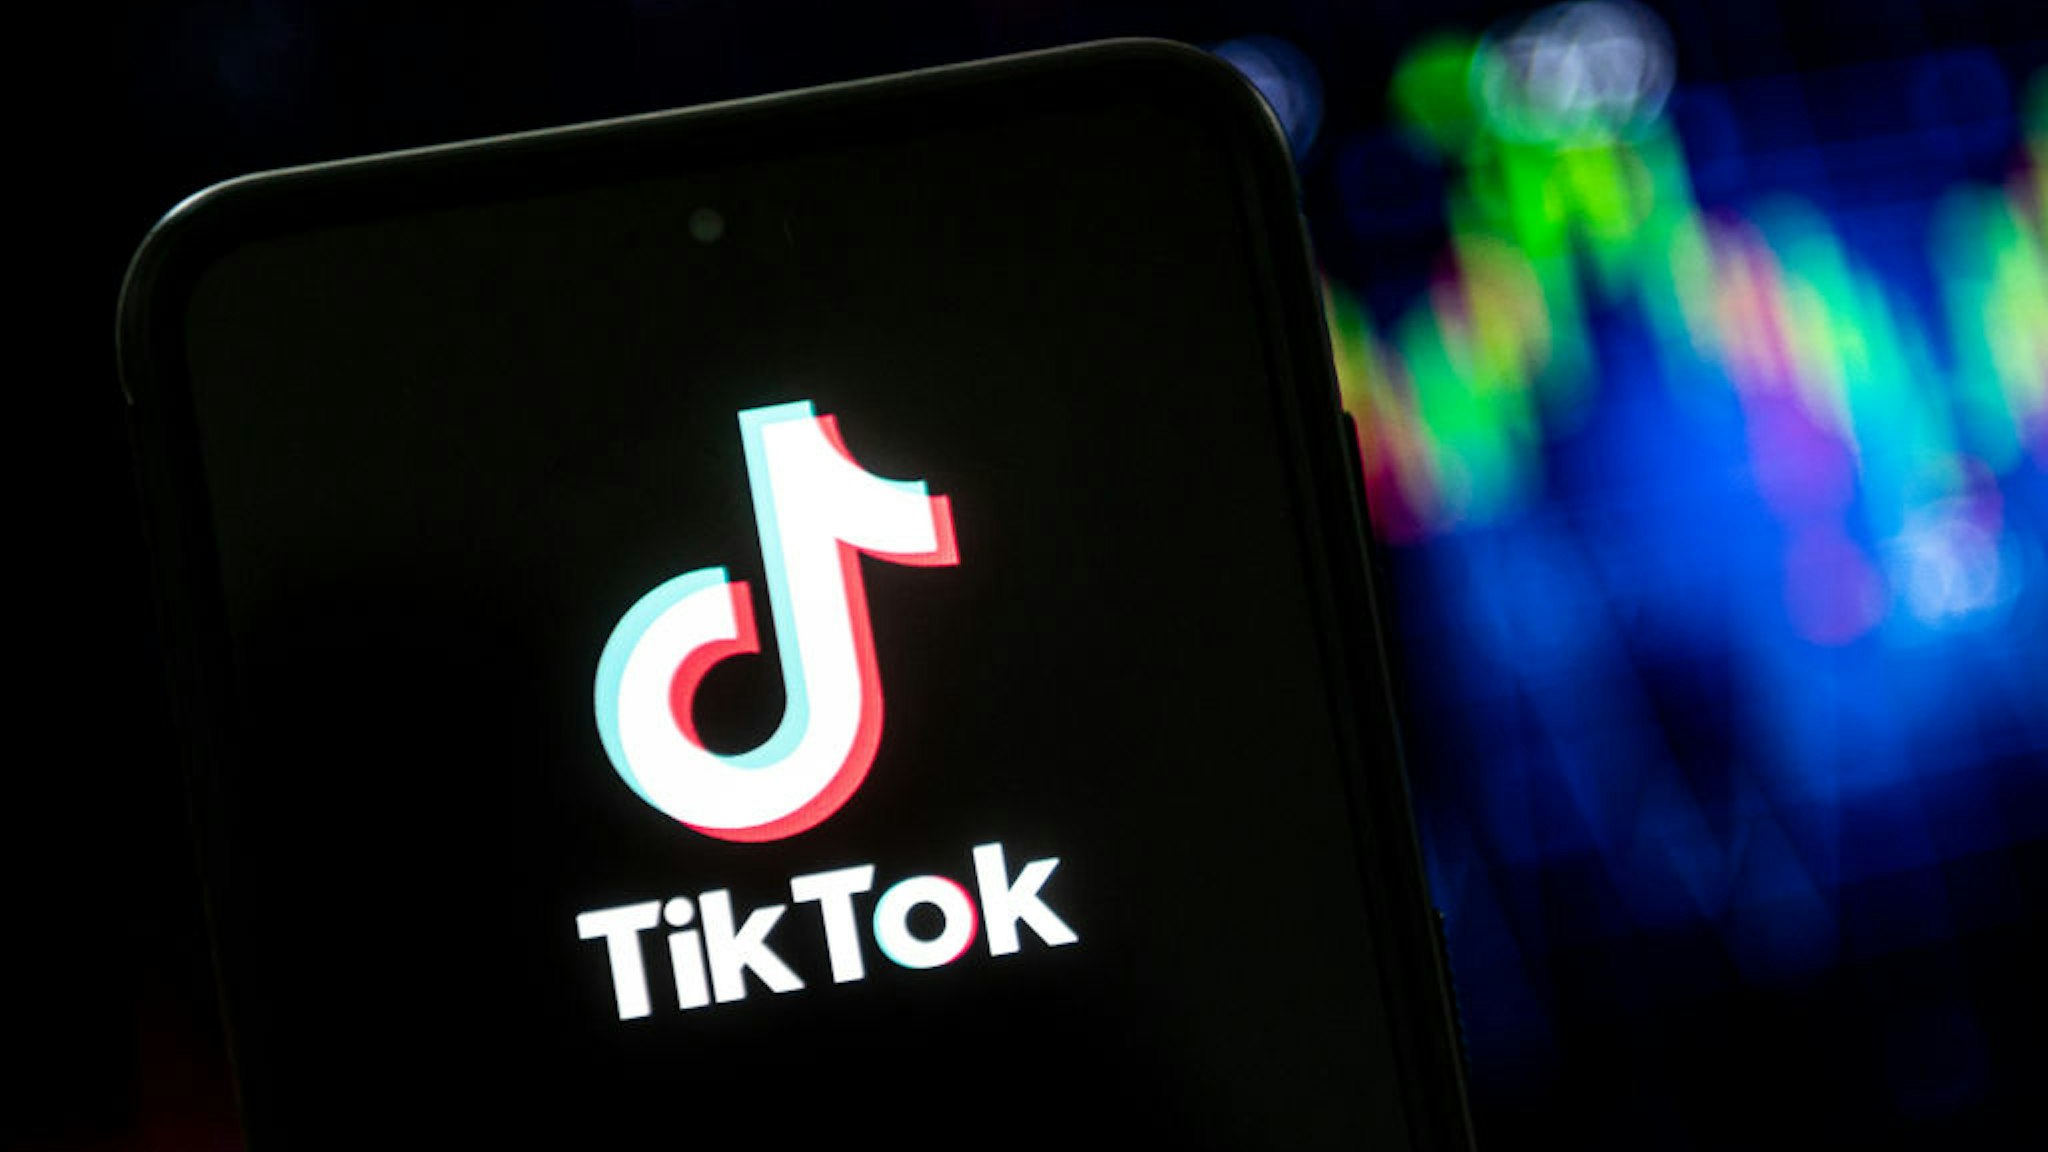 POLAND - 2022/09/02: In this photo illustration a TikTok logo seen displayed on a smartphone.